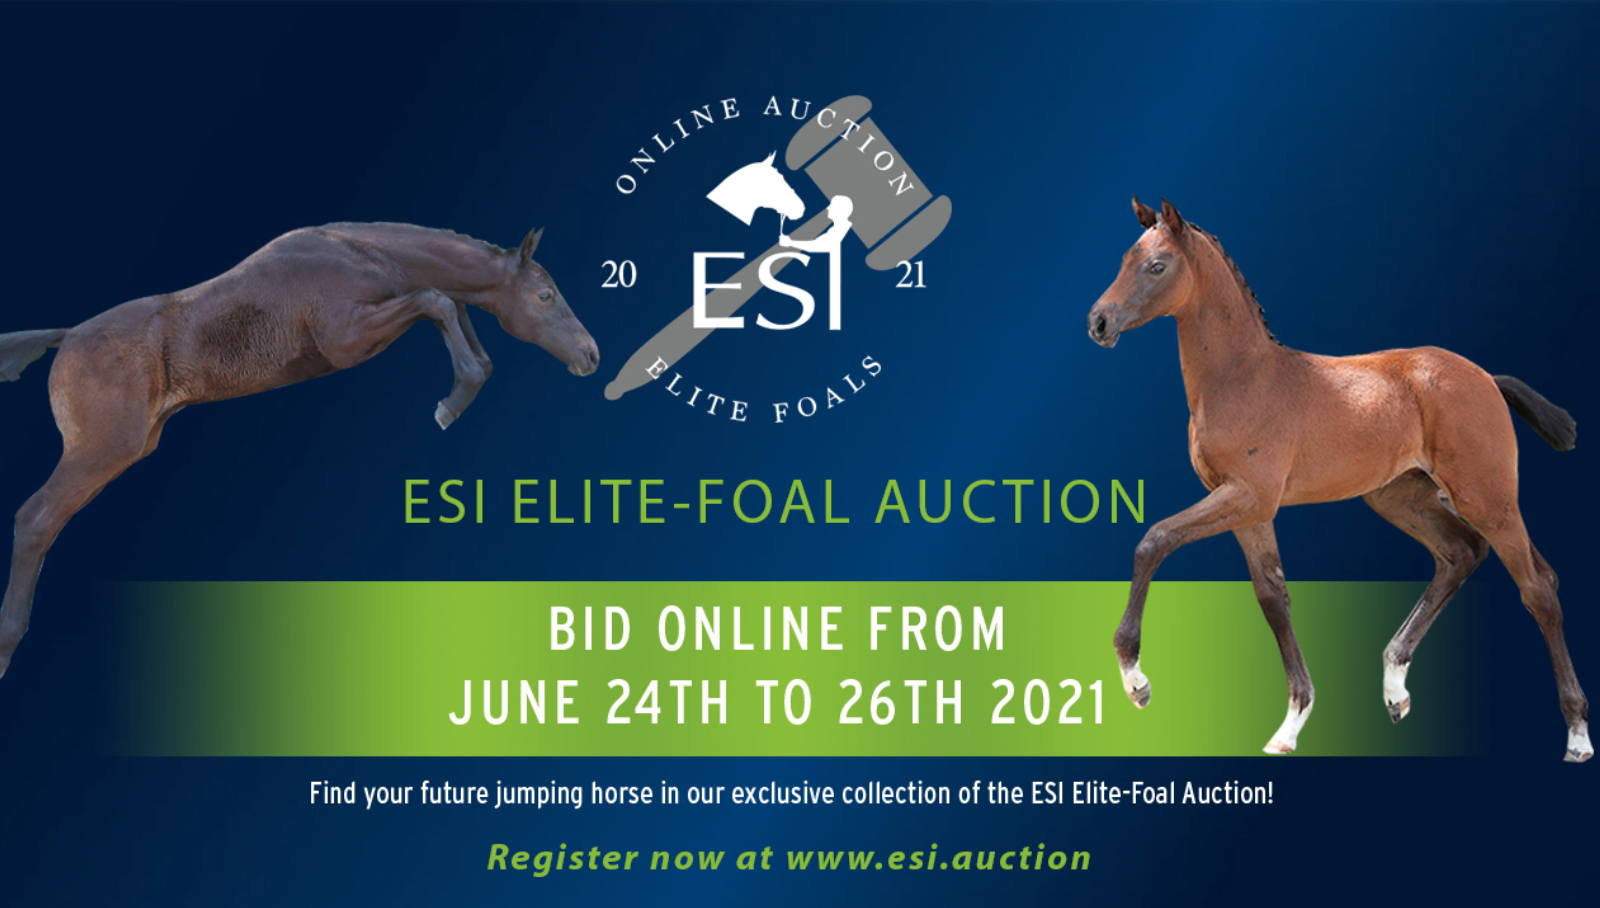 ESI Elite-Foal Collection is online